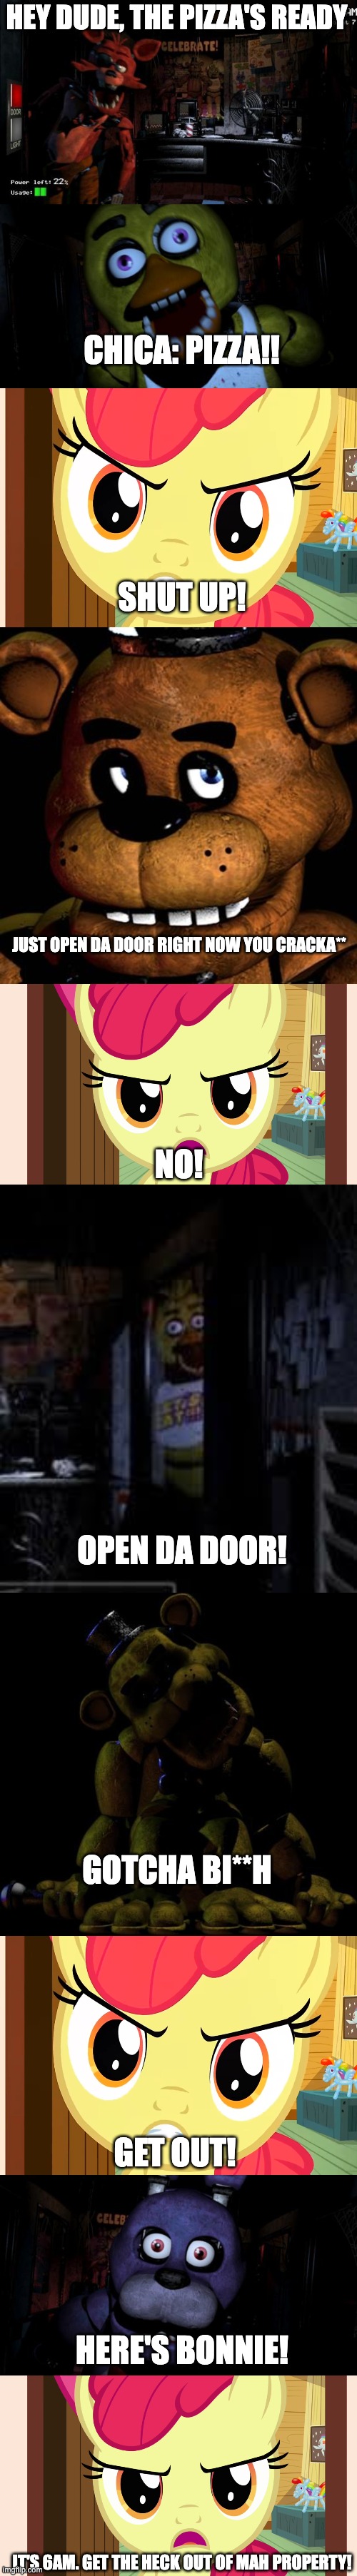 Applebloom battles FNAF! |  HEY DUDE, THE PIZZA'S READY; CHICA: PIZZA!! SHUT UP! JUST OPEN DA DOOR RIGHT NOW YOU CRACKA**; NO! OPEN DA DOOR! GOTCHA BI**H; GET OUT! HERE'S BONNIE! IT'S 6AM. GET THE HECK OUT OF MAH PROPERTY! | image tagged in foxy five nights at freddy's,freddy fazbear,fnaf,mlp,bonnie,chica | made w/ Imgflip meme maker